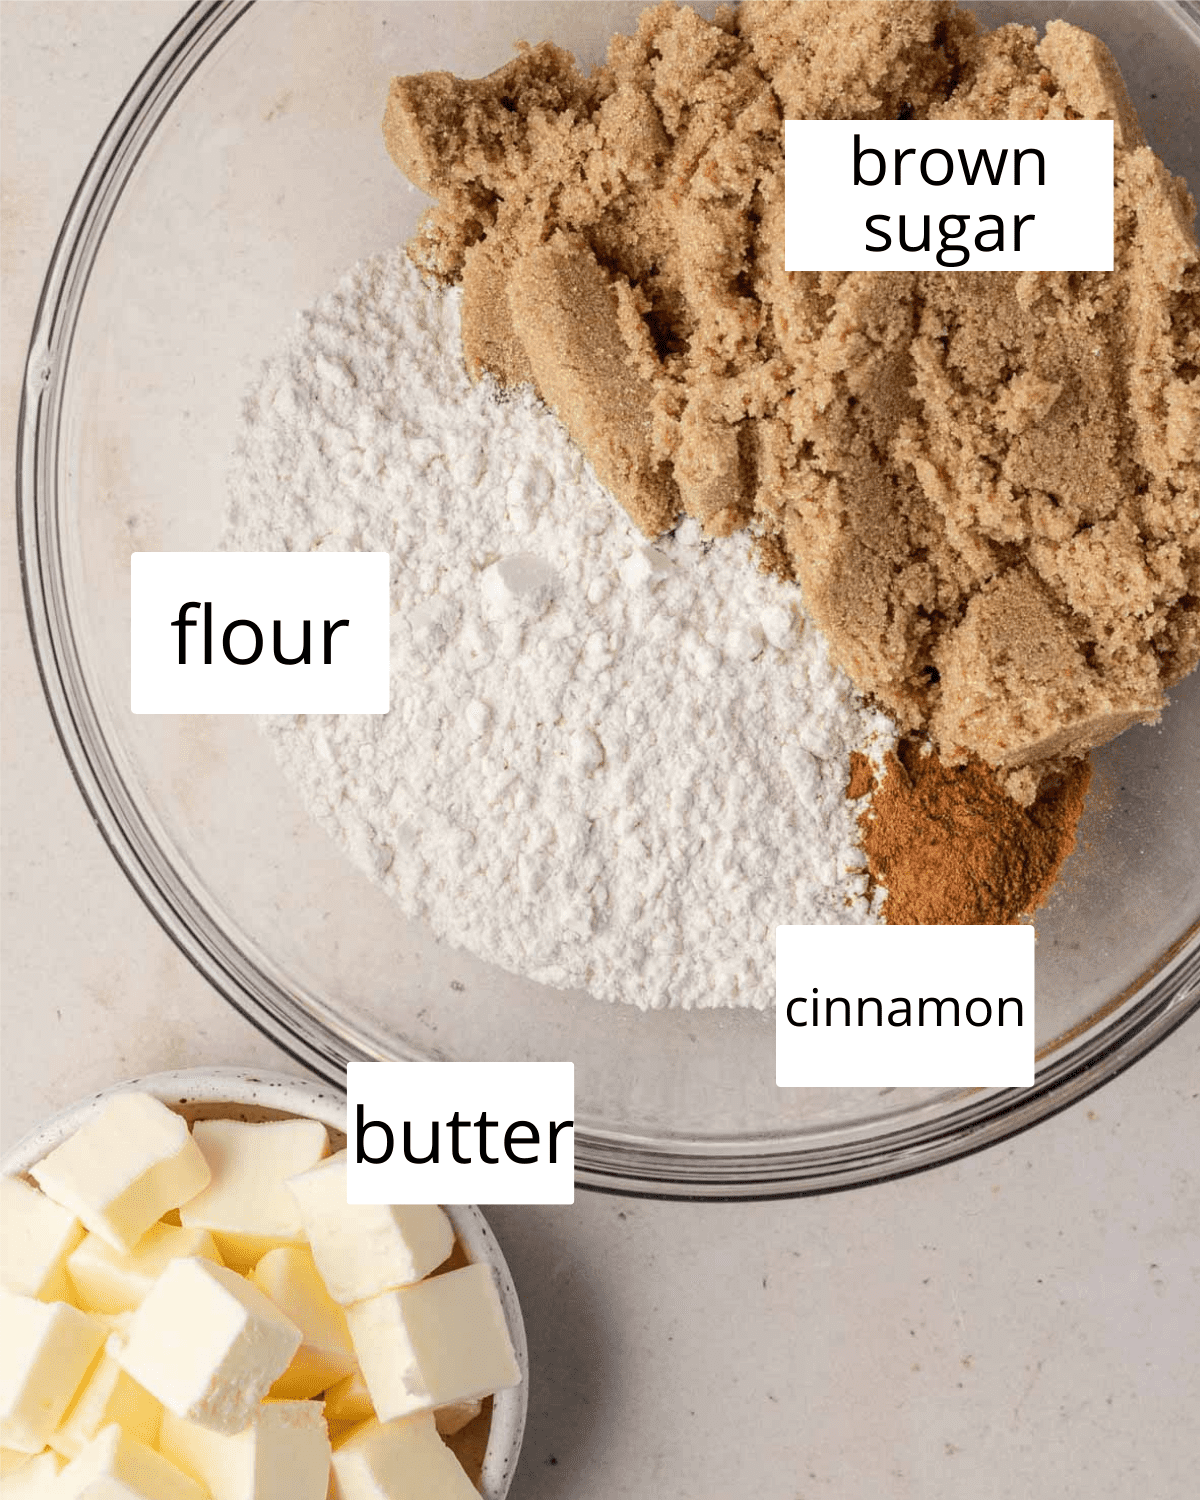 ingredients needed to make the streusel topping